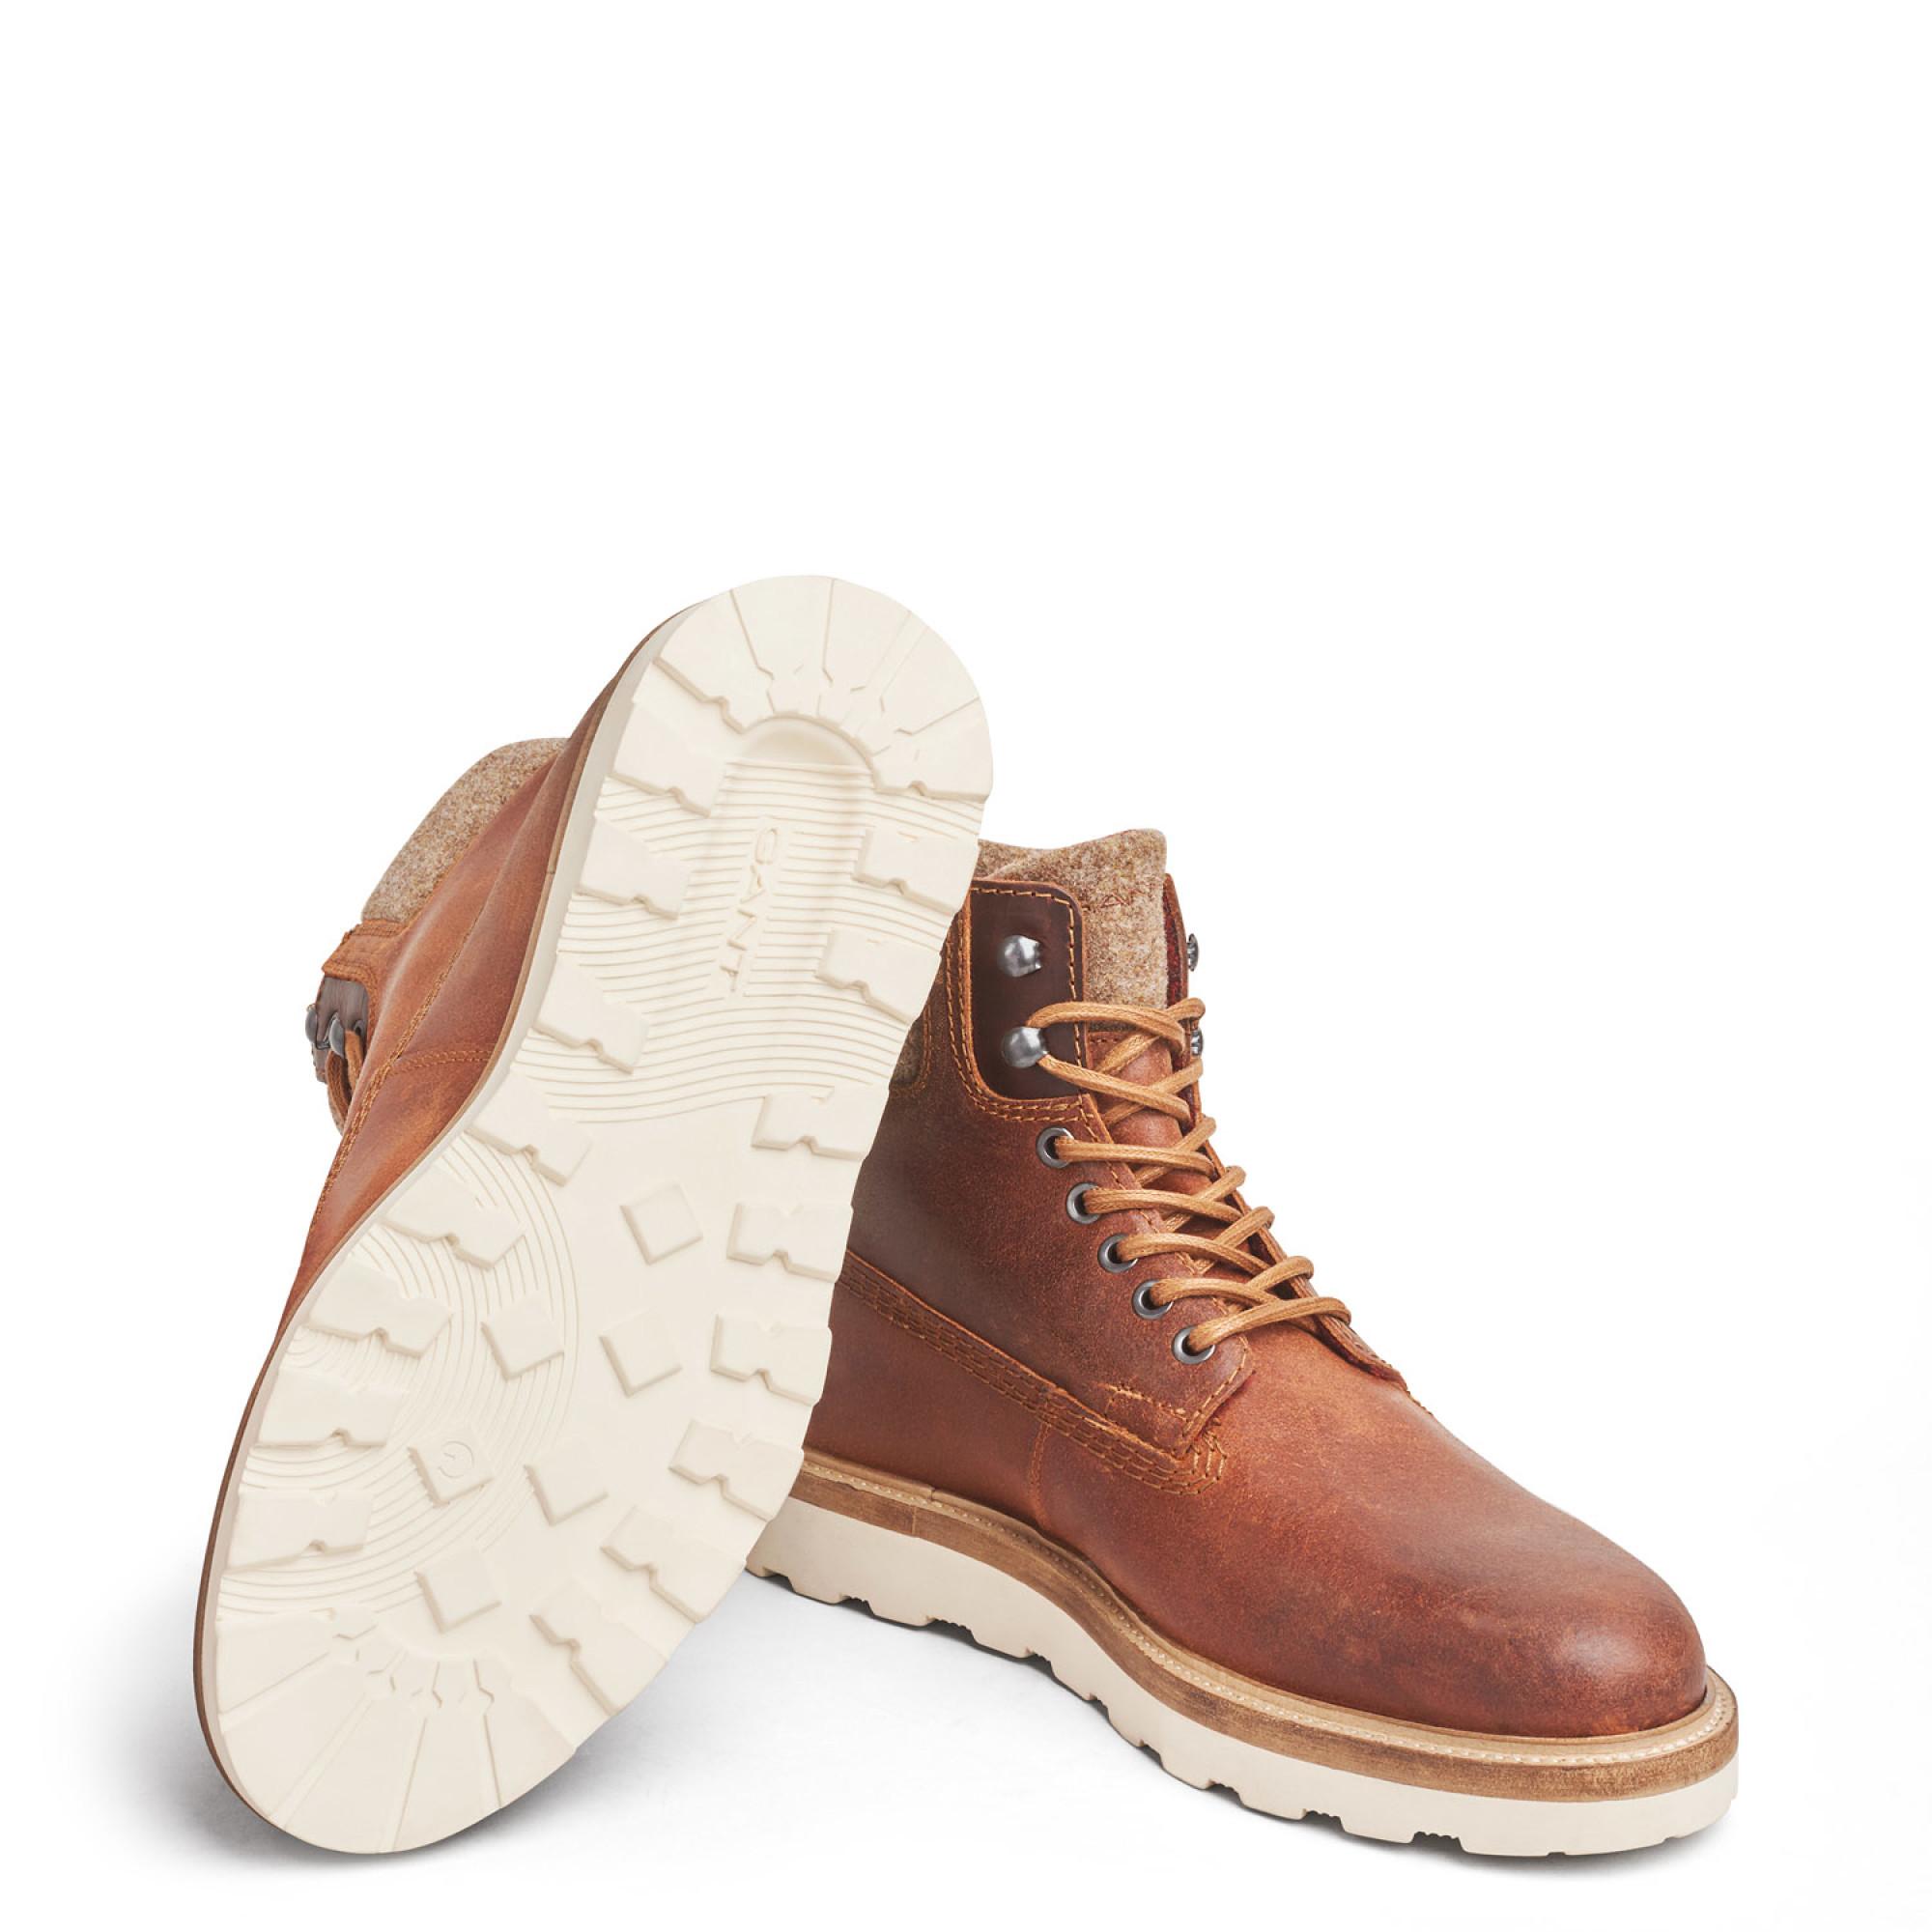 GANT Don Mid Lace Boots in Brown for Men - Lyst